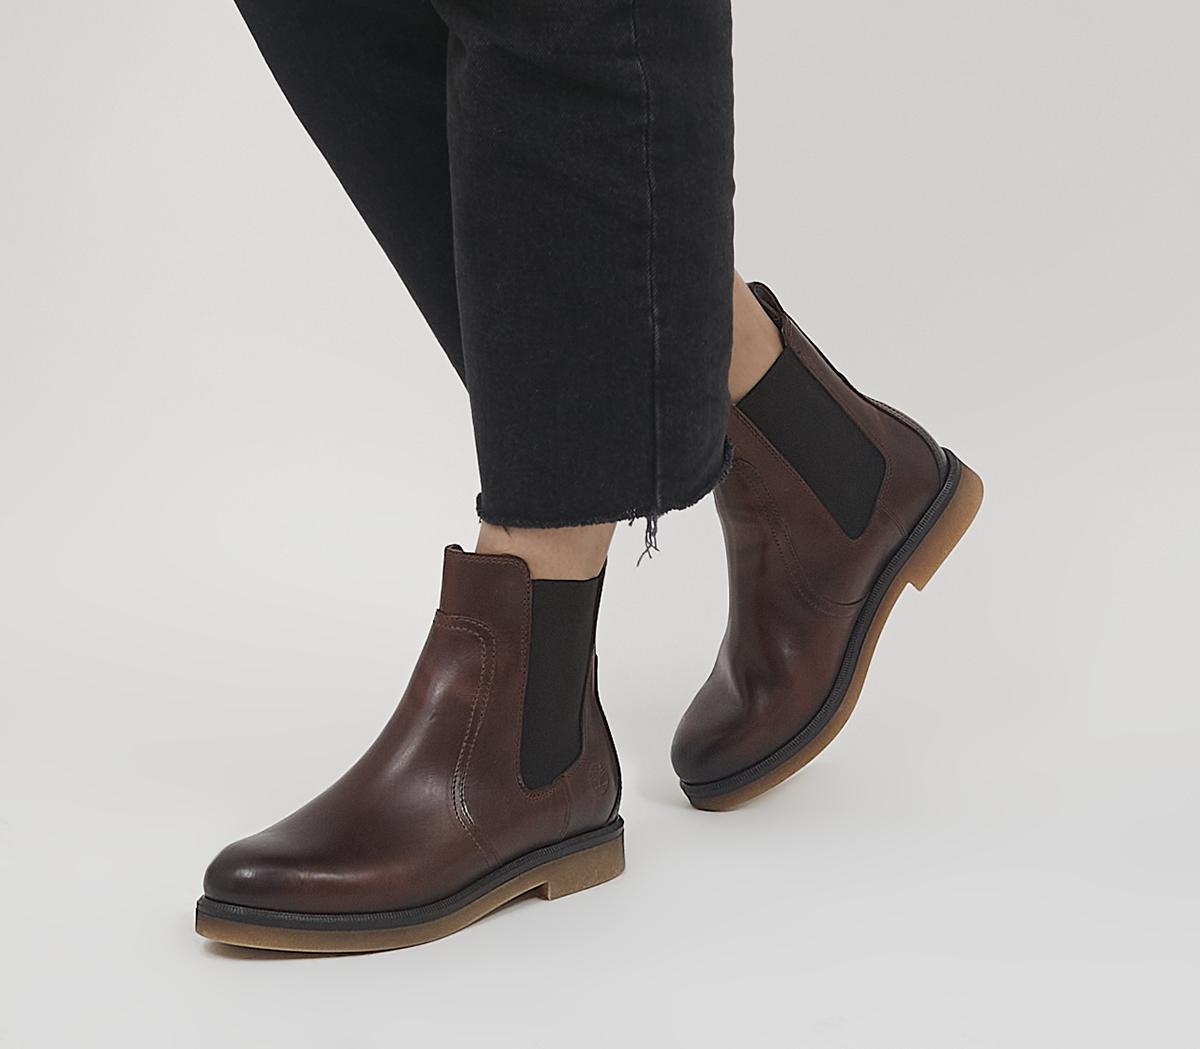 Timberland Cambridge Square Chelsea Boots Medium Brown - Women's Ankle ...